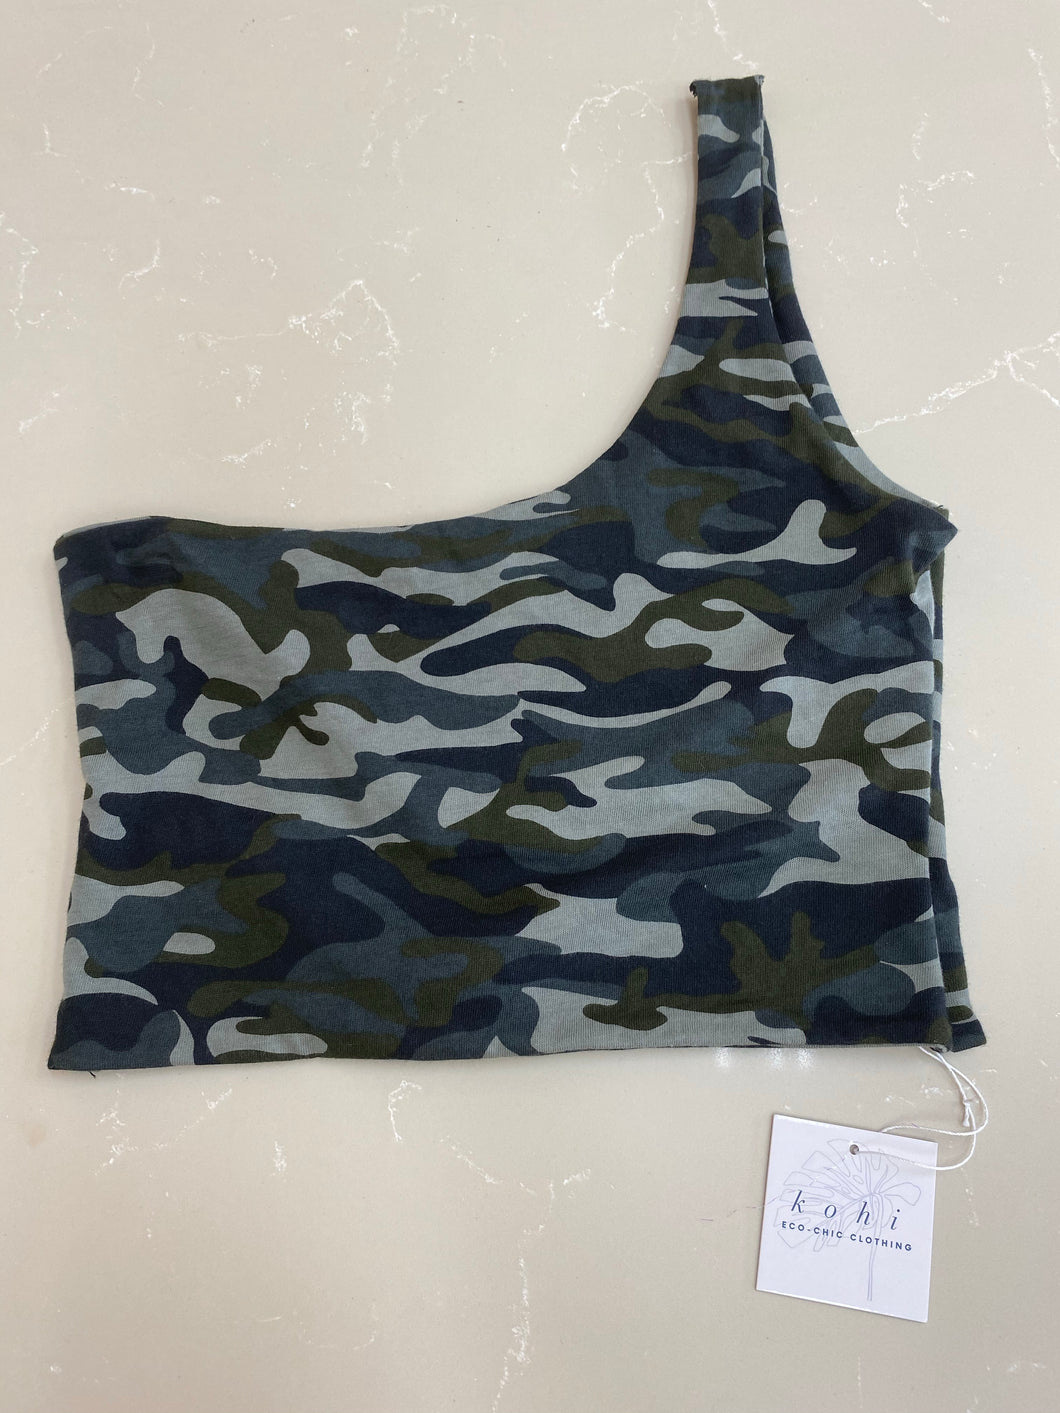 ON THE GRIND CAMO TOP